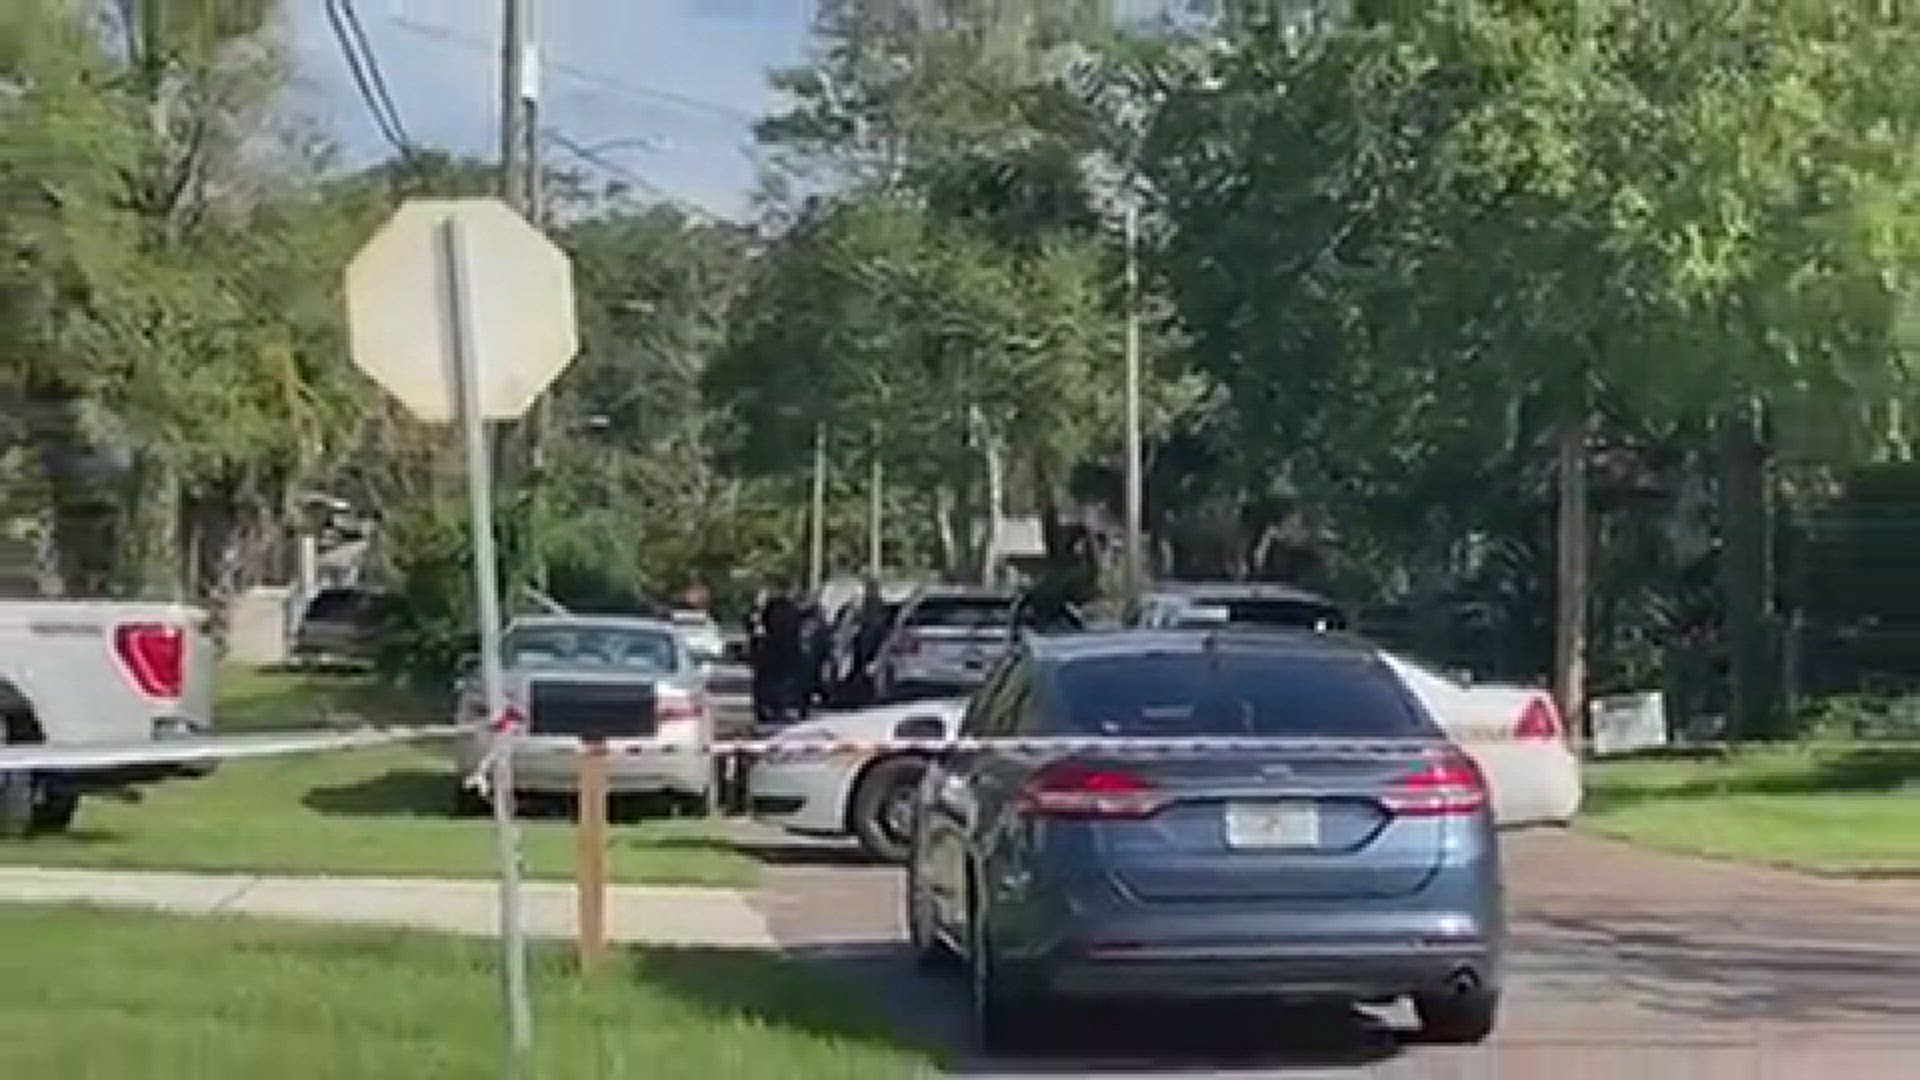 Jacksonville police are on scene in the 1500 block of Mt. Herman Street after a 9-year-old boy was shot inside of a home.
Credit: Atyia Collins